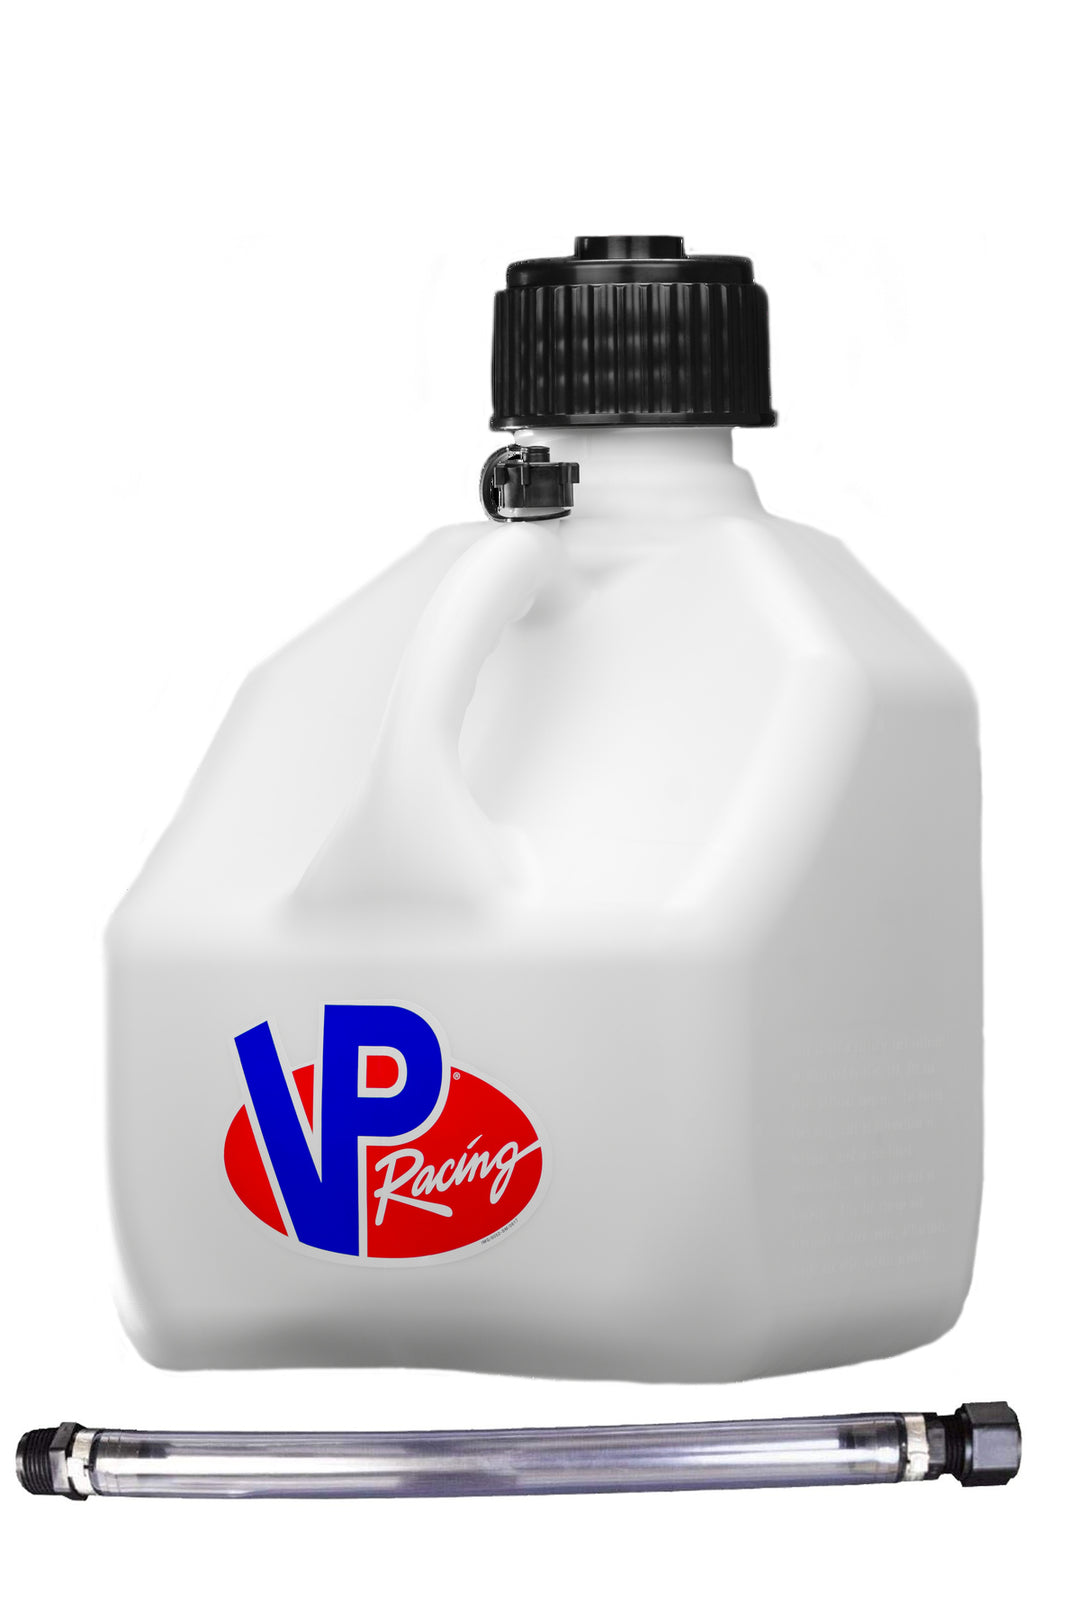 VP Racing 3-Gallon Motorsport Container - White Jug, Black Cap w/Filler Hose - Dirty Racing Products